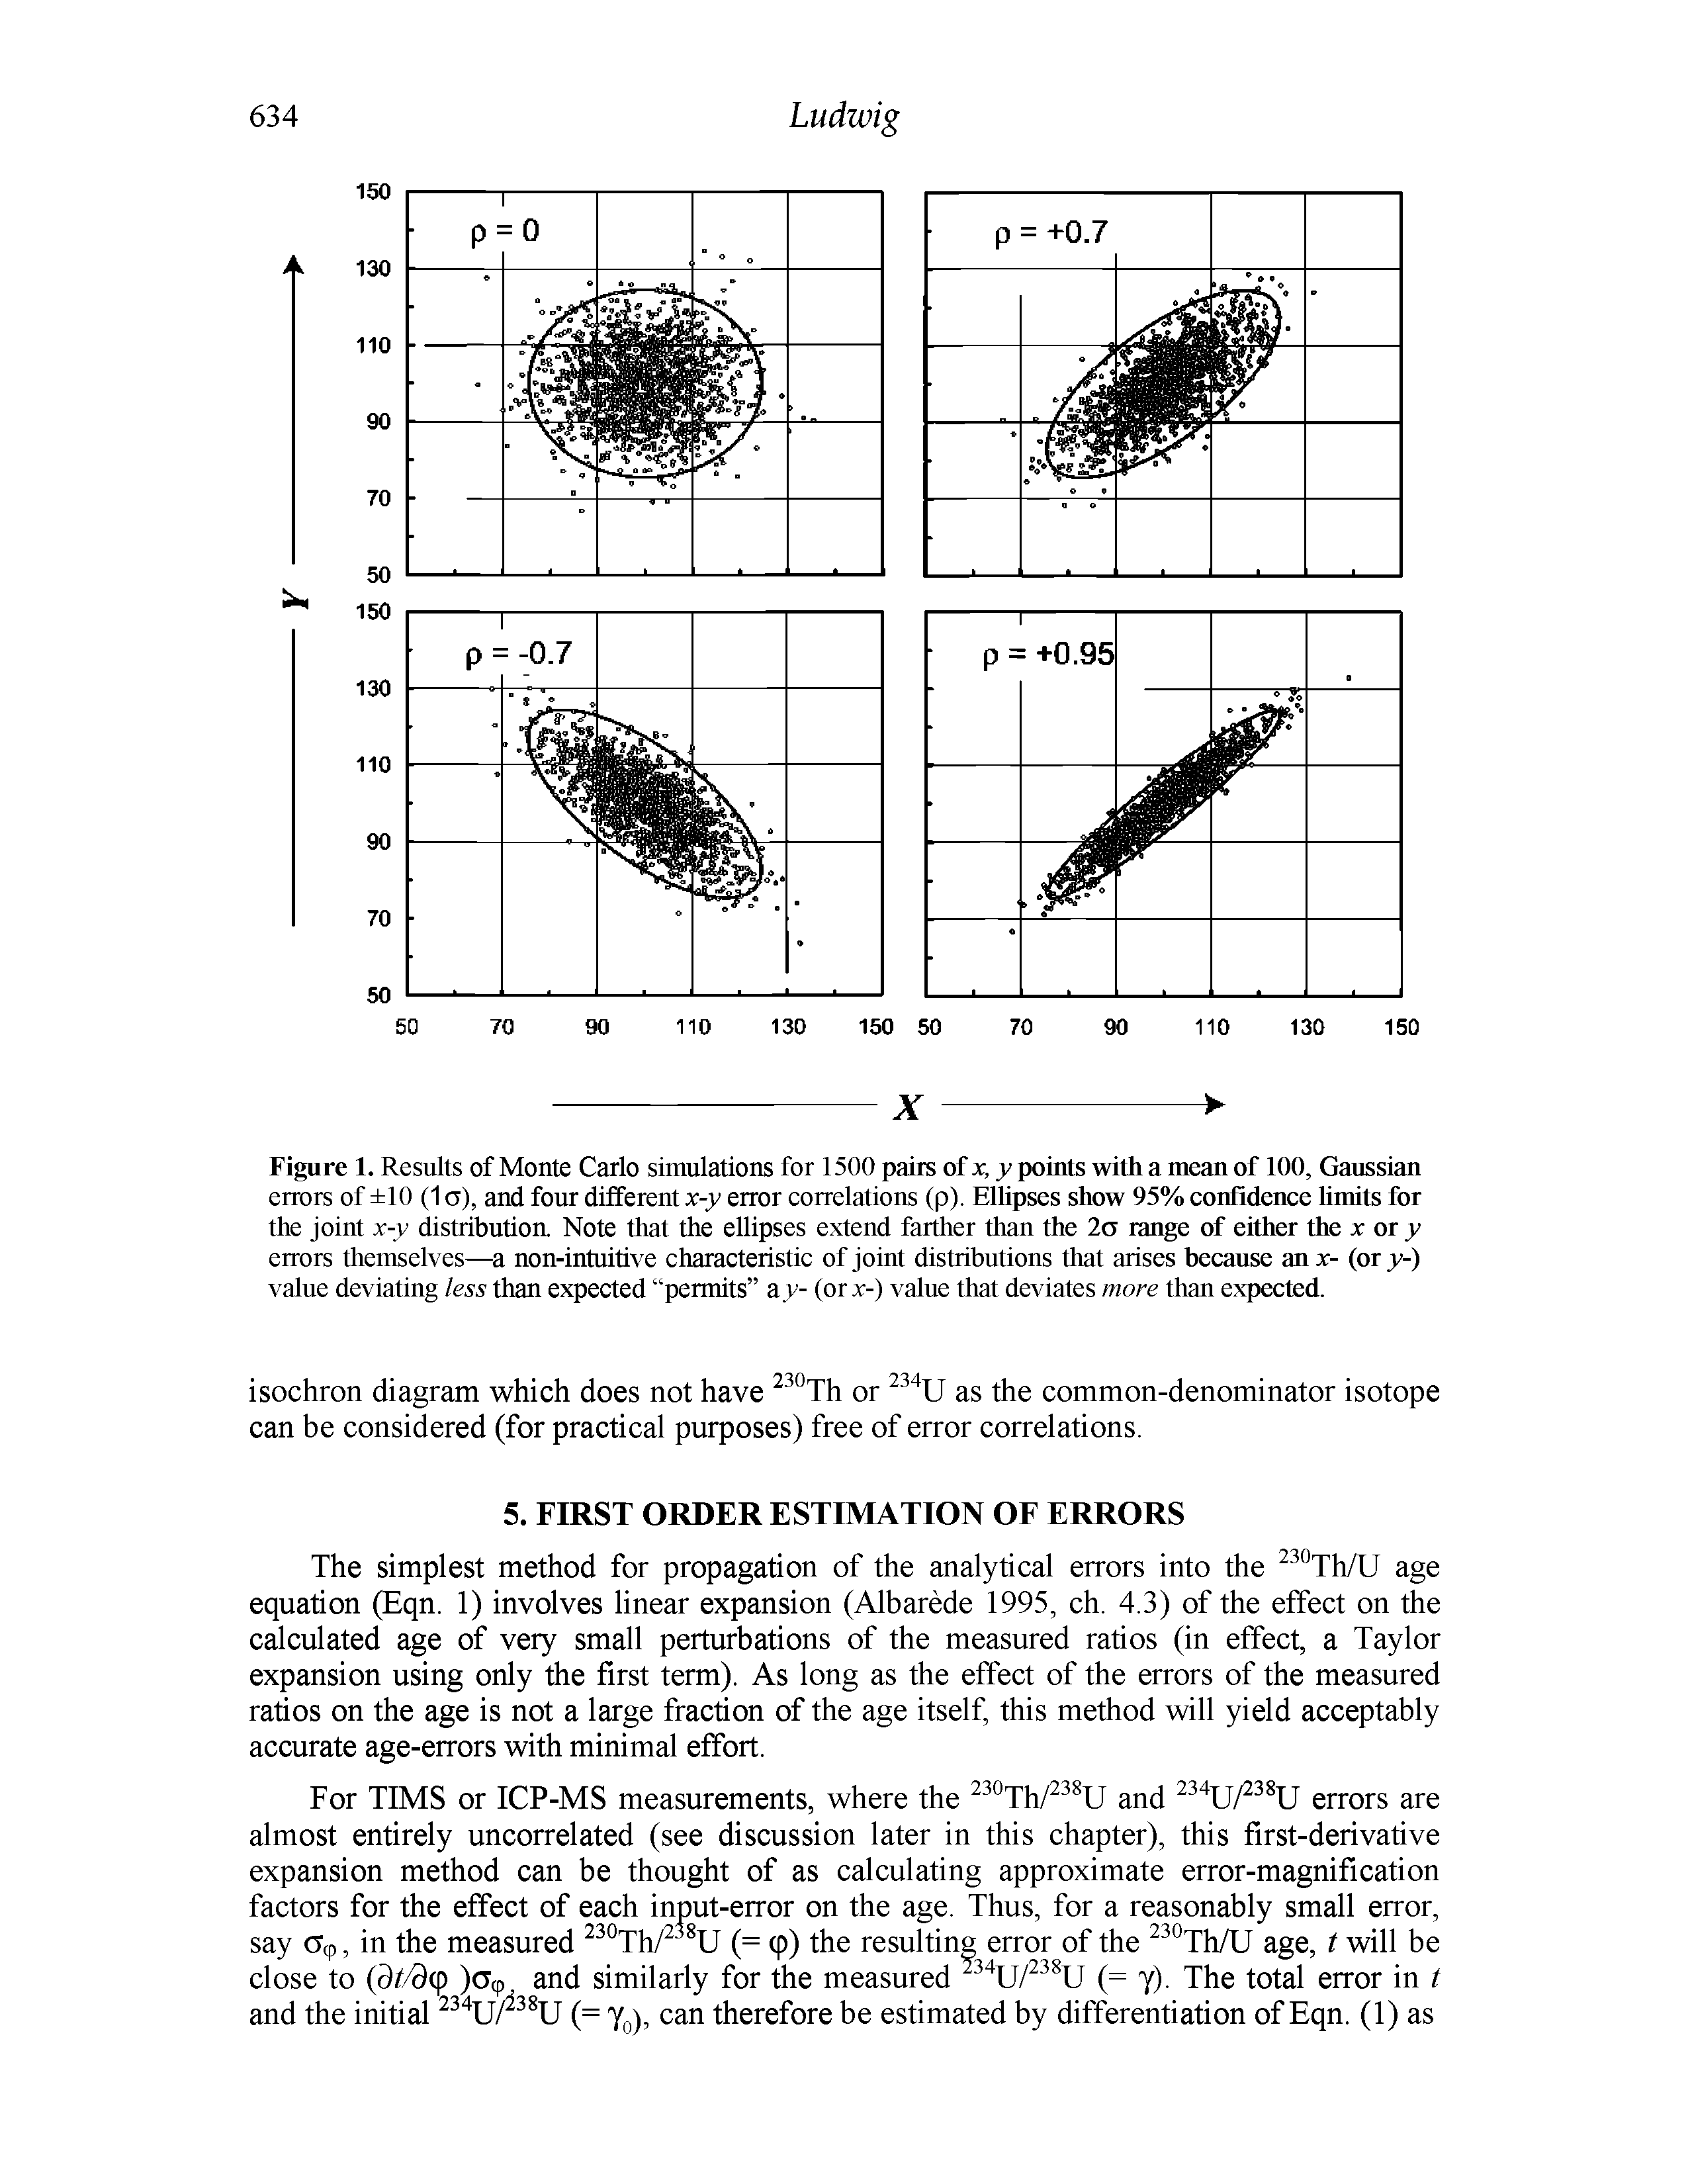 Figure 1. Results of Monte Carlo simulations for 1500 pairs of x, y points with a mean of 100, Ganssian errors of 10 (1 o), and four different x-y error correlations (p). Elhpses show 95% confidence hmits for the joint x-y distribution. Note that the ellipses extend farther than the 2o range of either the x or j errors themselves—a non-intuitive characteristic of joint distributions that arises because an x- (or y-) value deviating less than expected permits ay- (orx-) value that deviates more than expected.